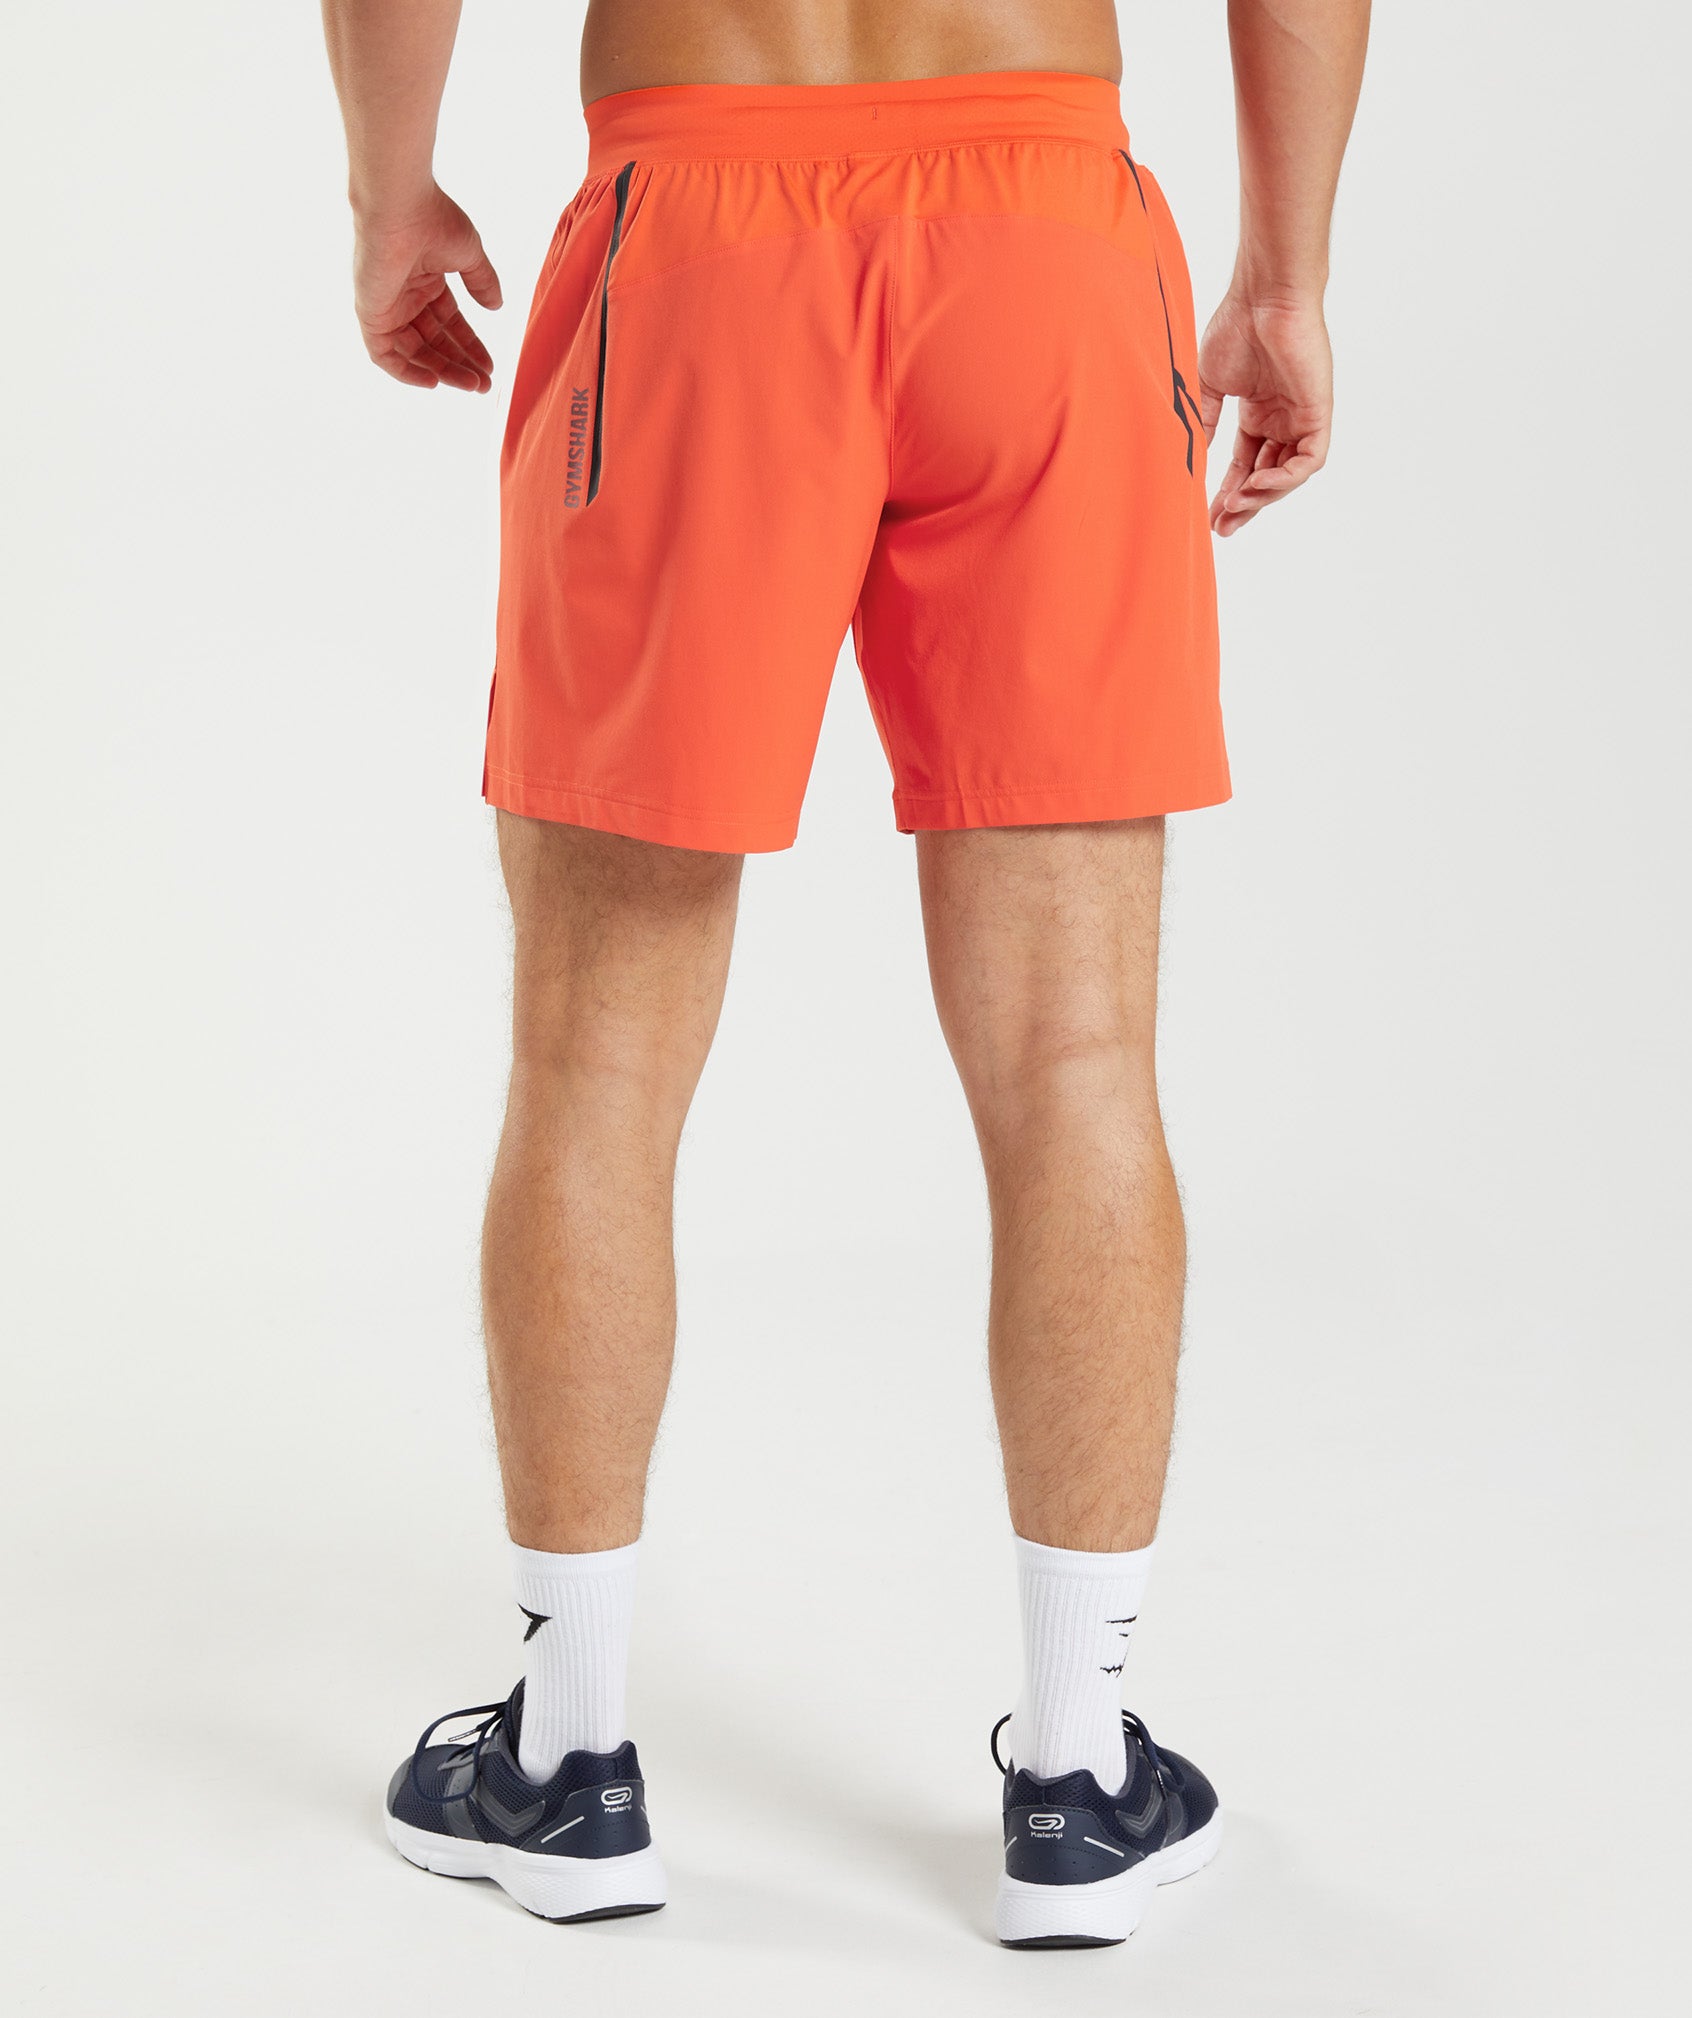 Apex 8" Function Shorts in Pepper Red - view 2